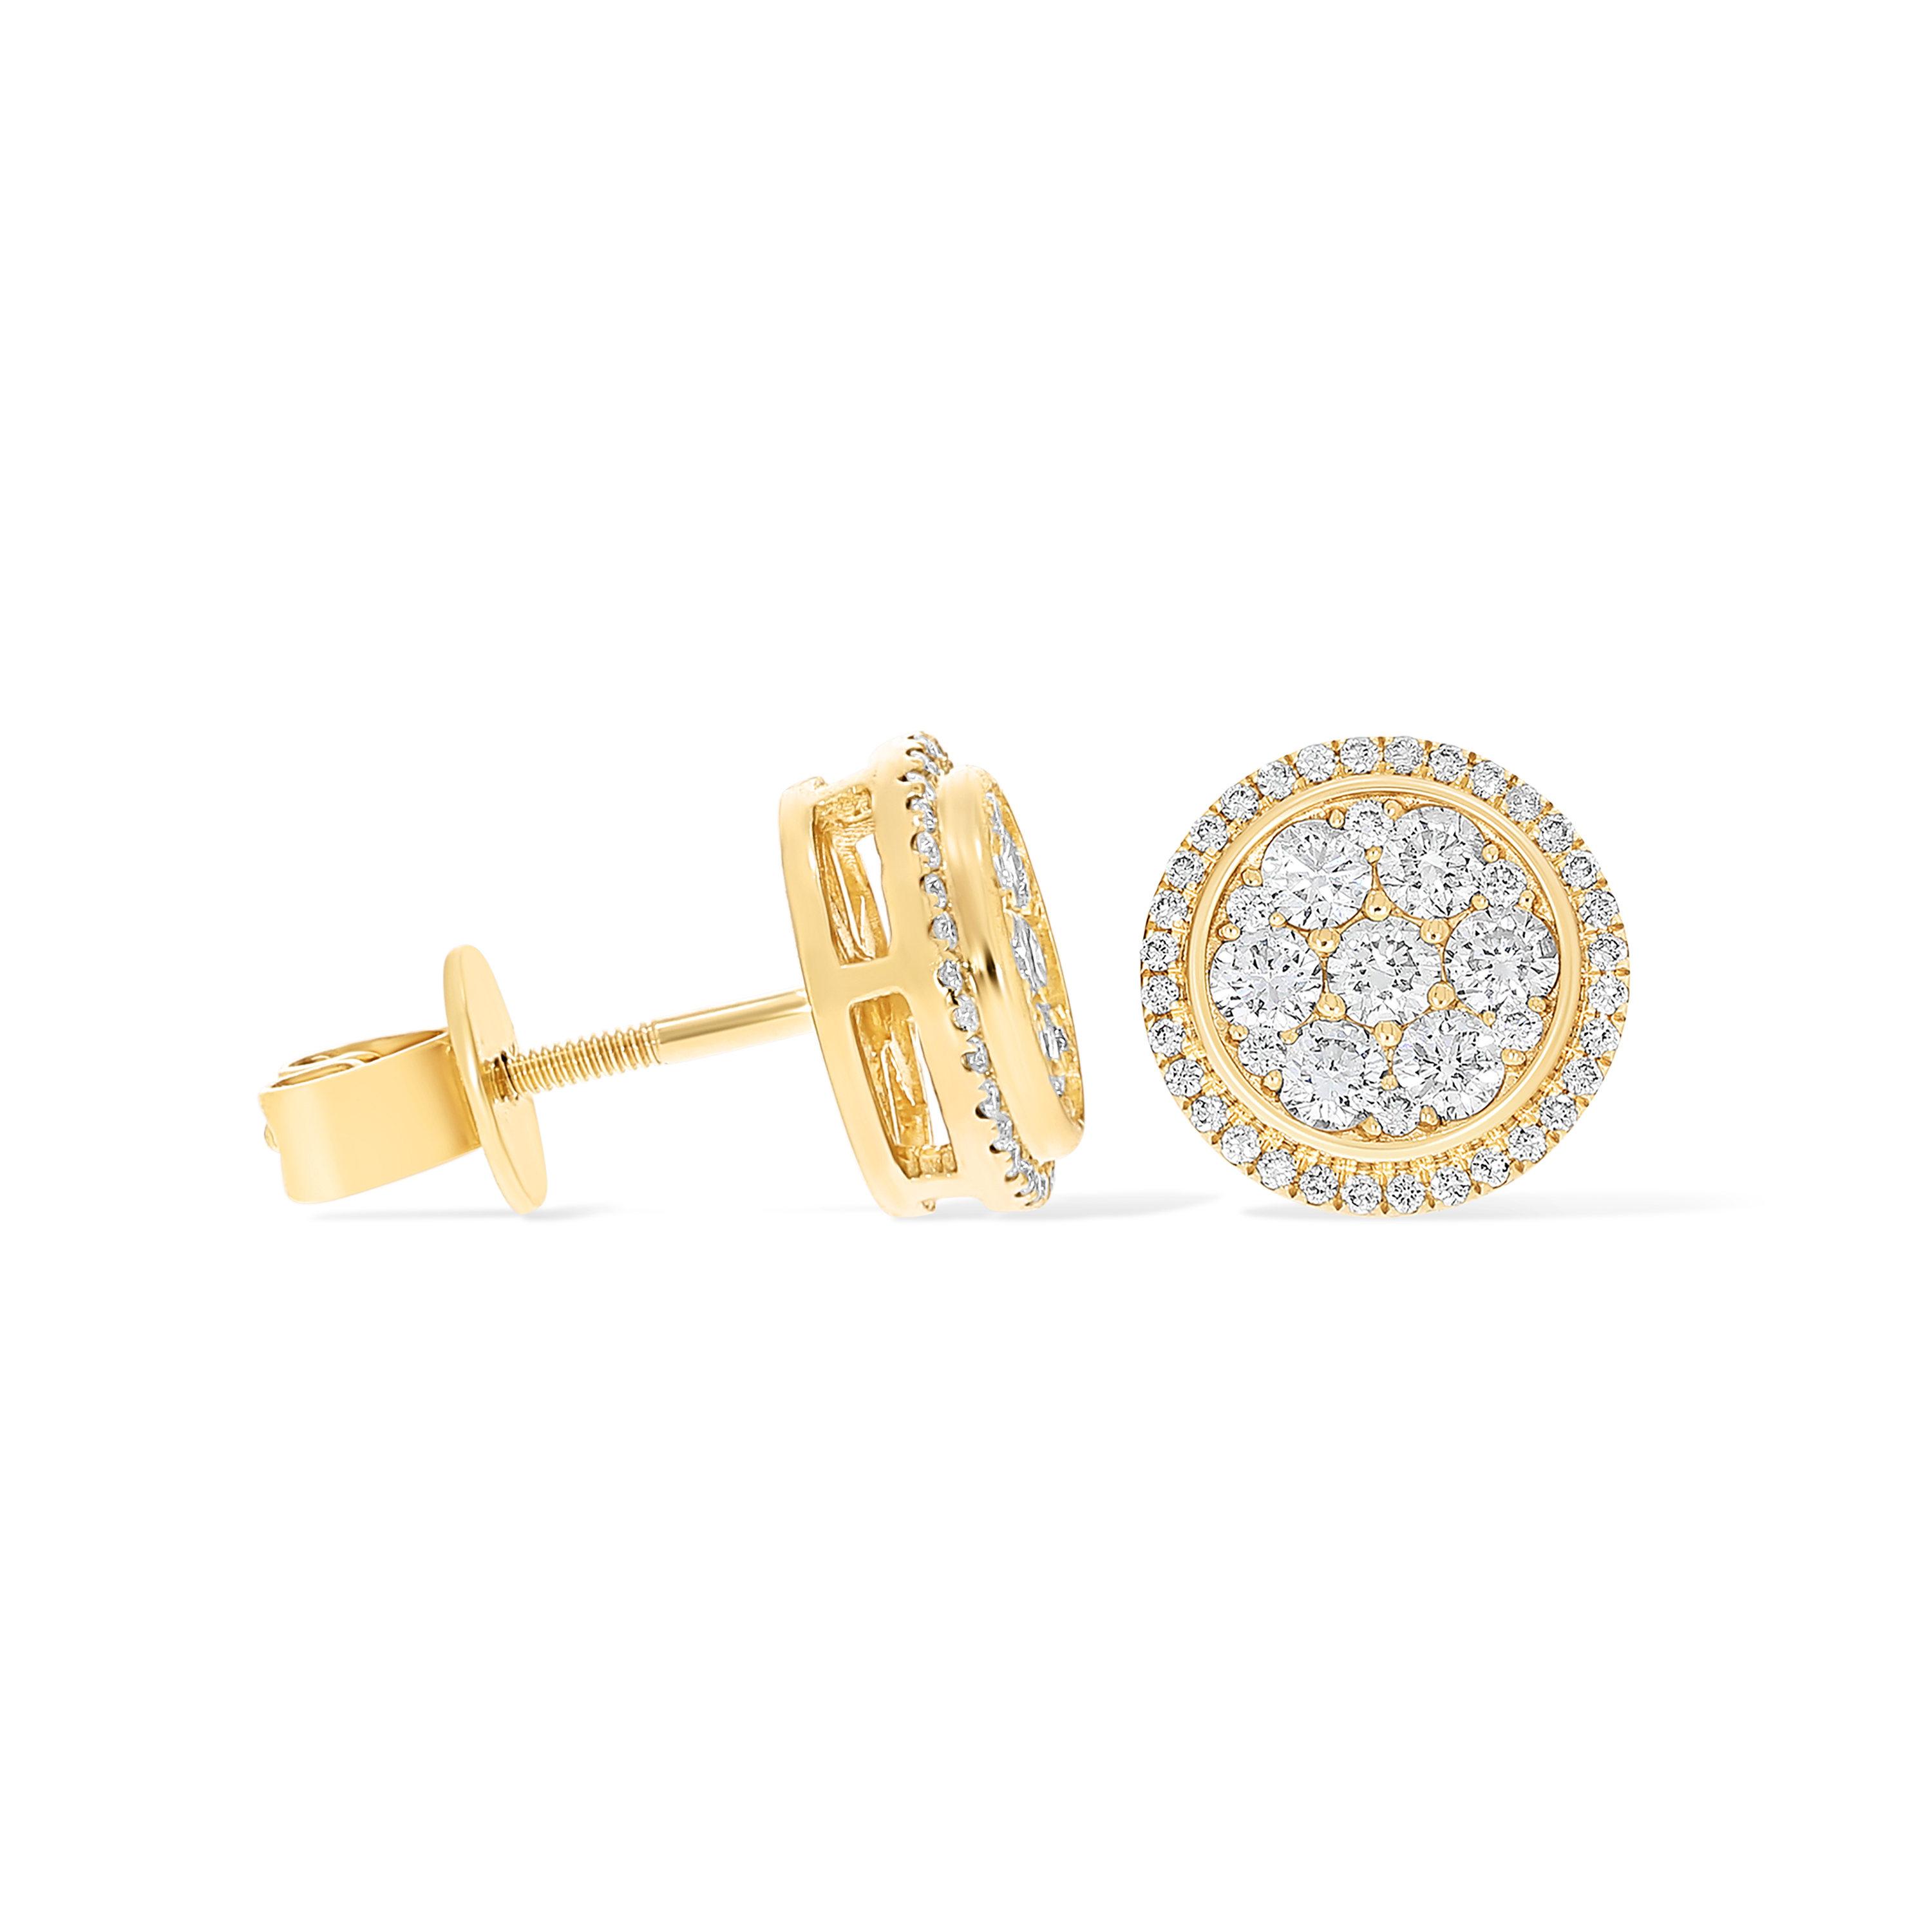 Diamond Round Cluster in Halo Setting Earrings 0.84 ct. 14k Yellow